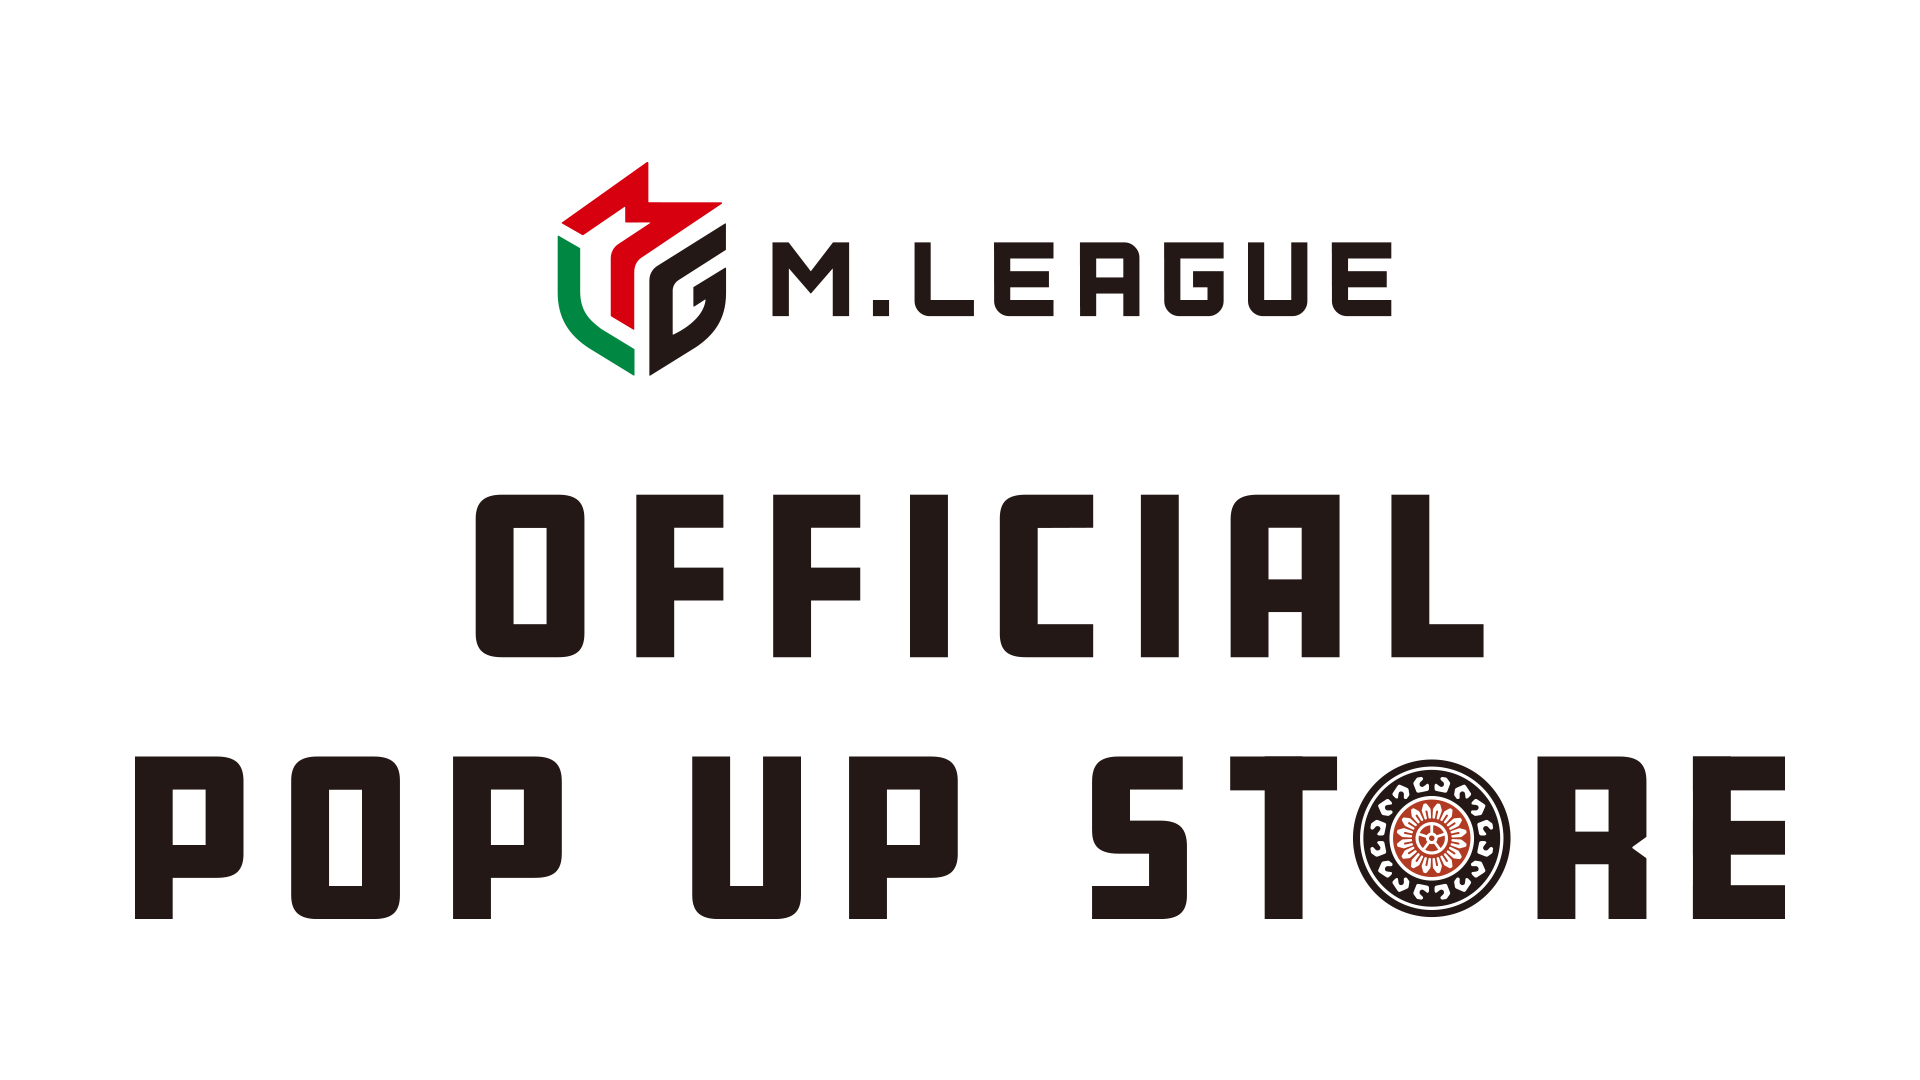 M.LEAGUE OFFICIAL SHOP　全国7カ所でPOP UP STOREを開催決定 ～開催地域は新潟、岐阜、鹿児島、仙台、三宮、那覇、名古屋～